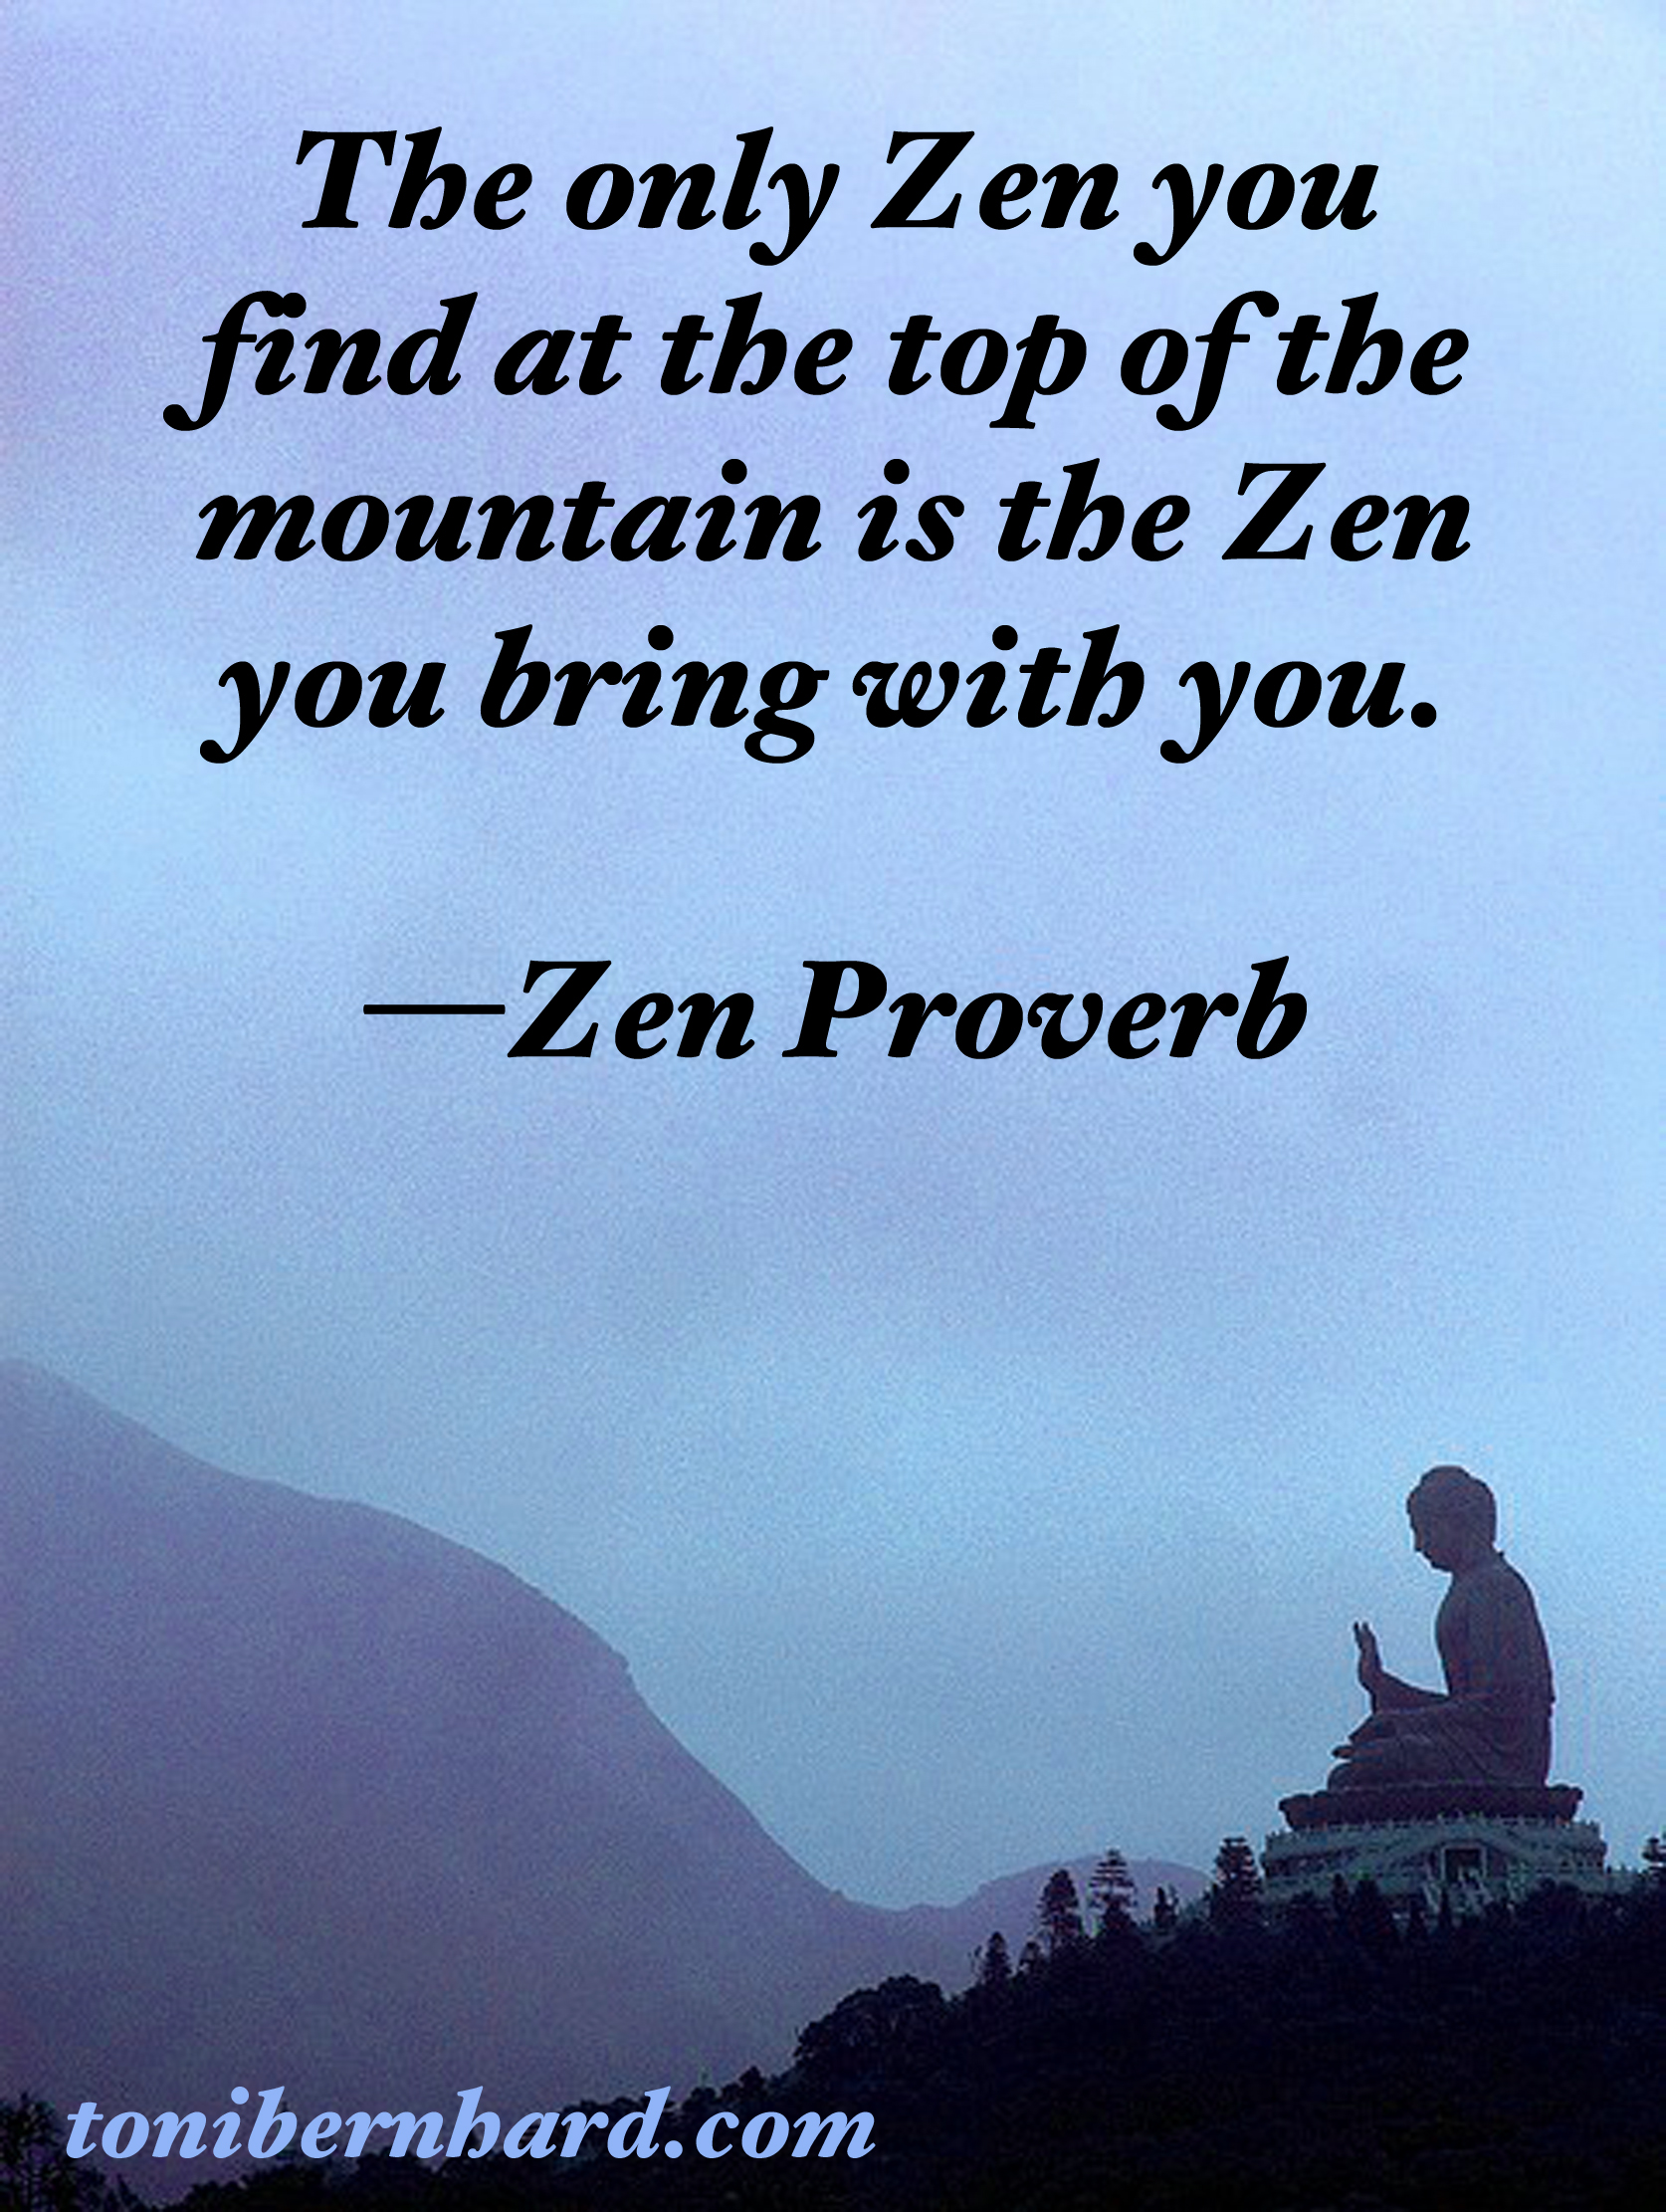 Zen And The Art Of Motorcycle Maintenance Quotes. QuotesGram